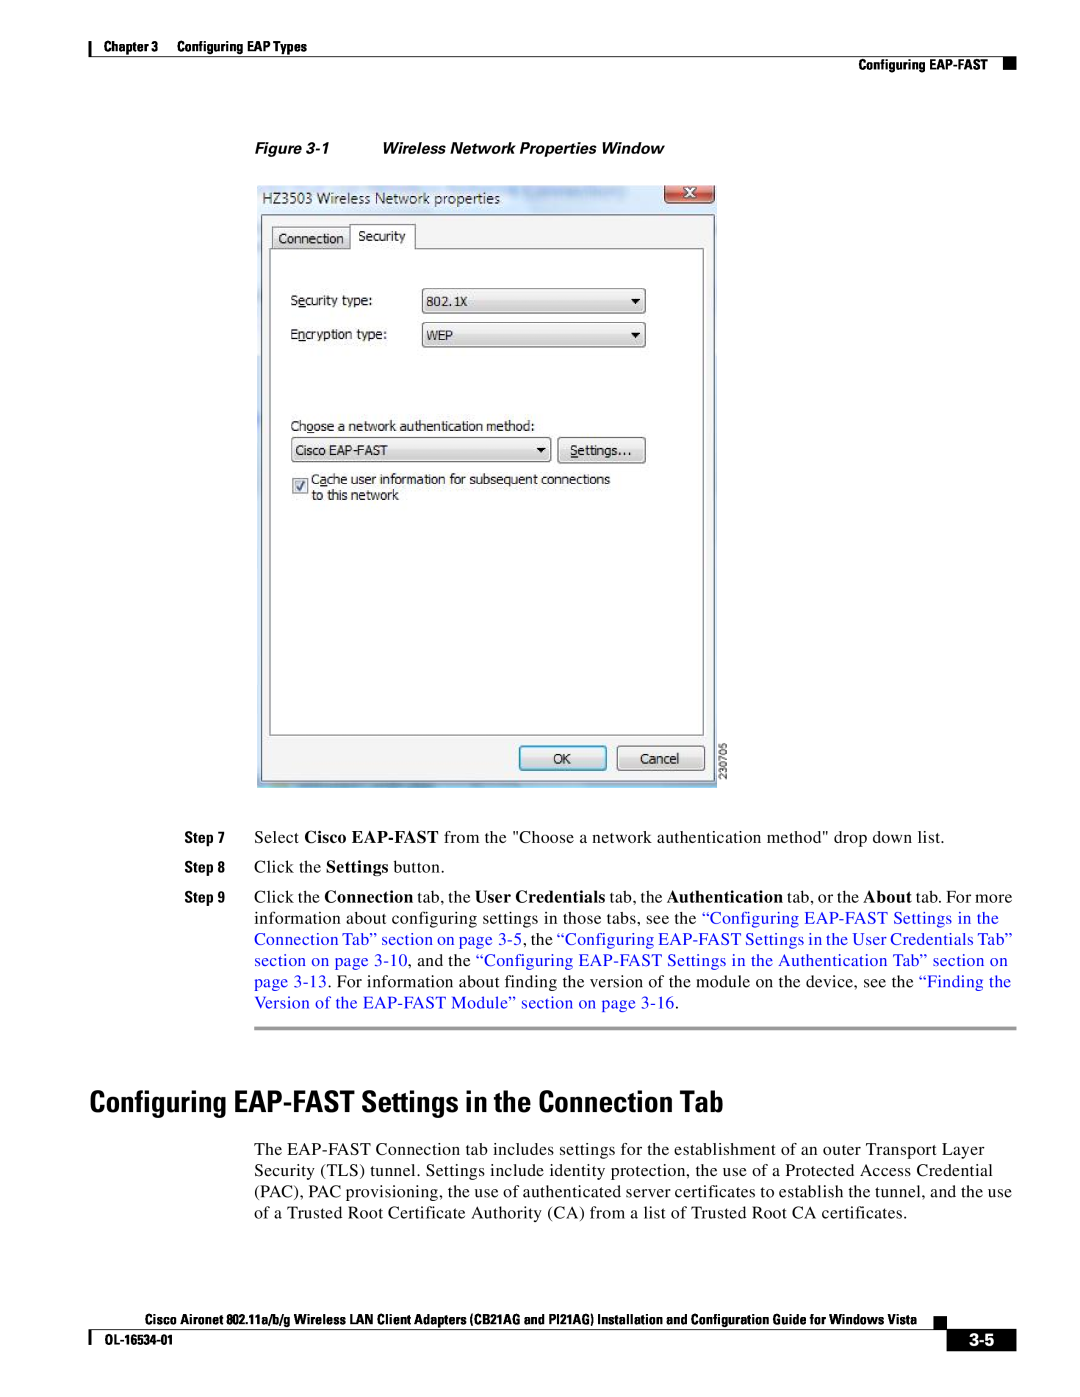 Cisco Systems CB21AG, PI21AG manual Configuring EAP-FAST Settings in the Connection Tab 